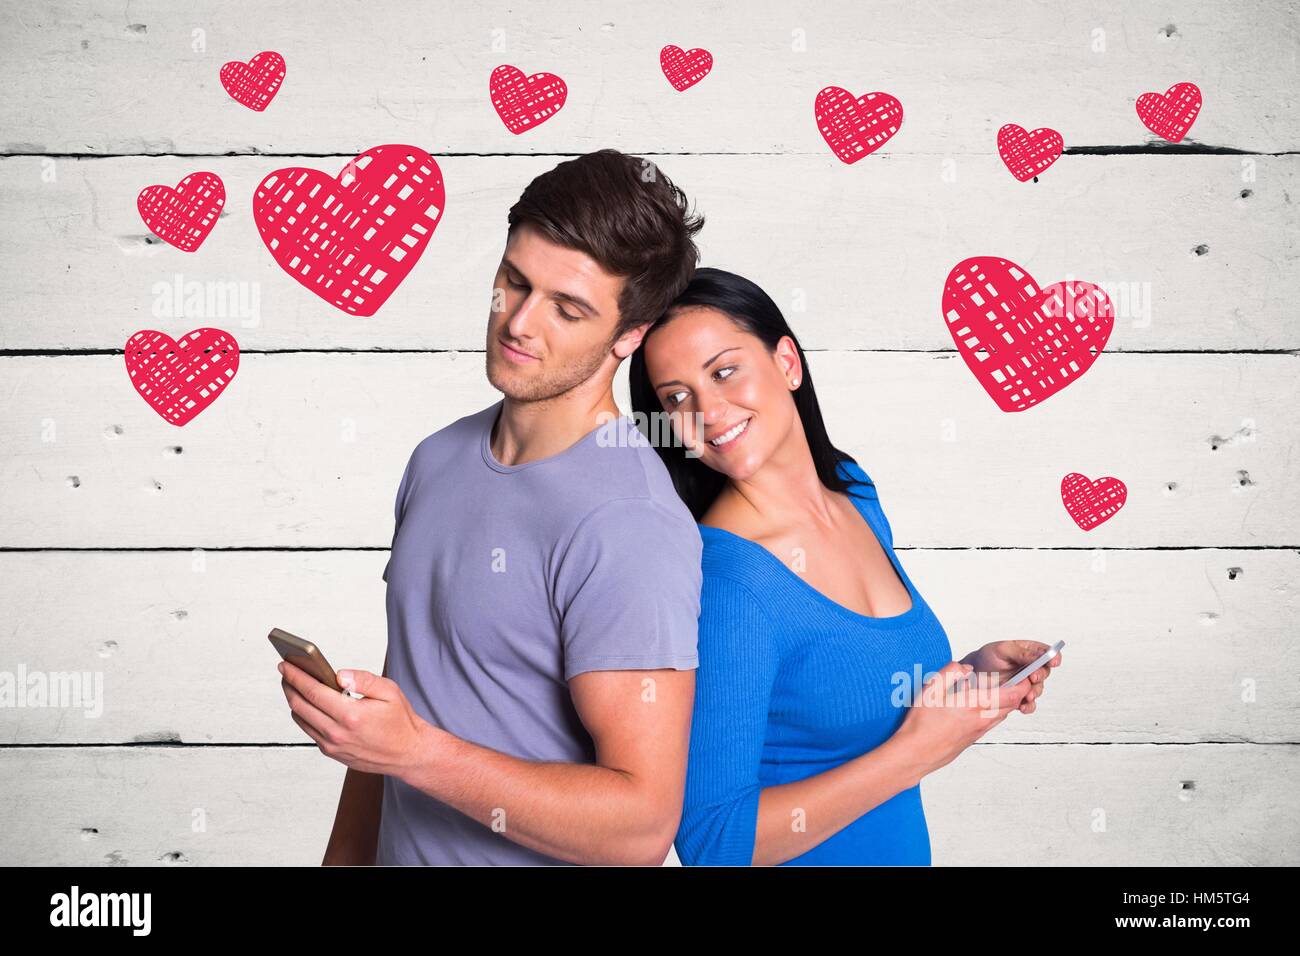 Romantic couple texting message against red hearts on wooden panel Stock Photo